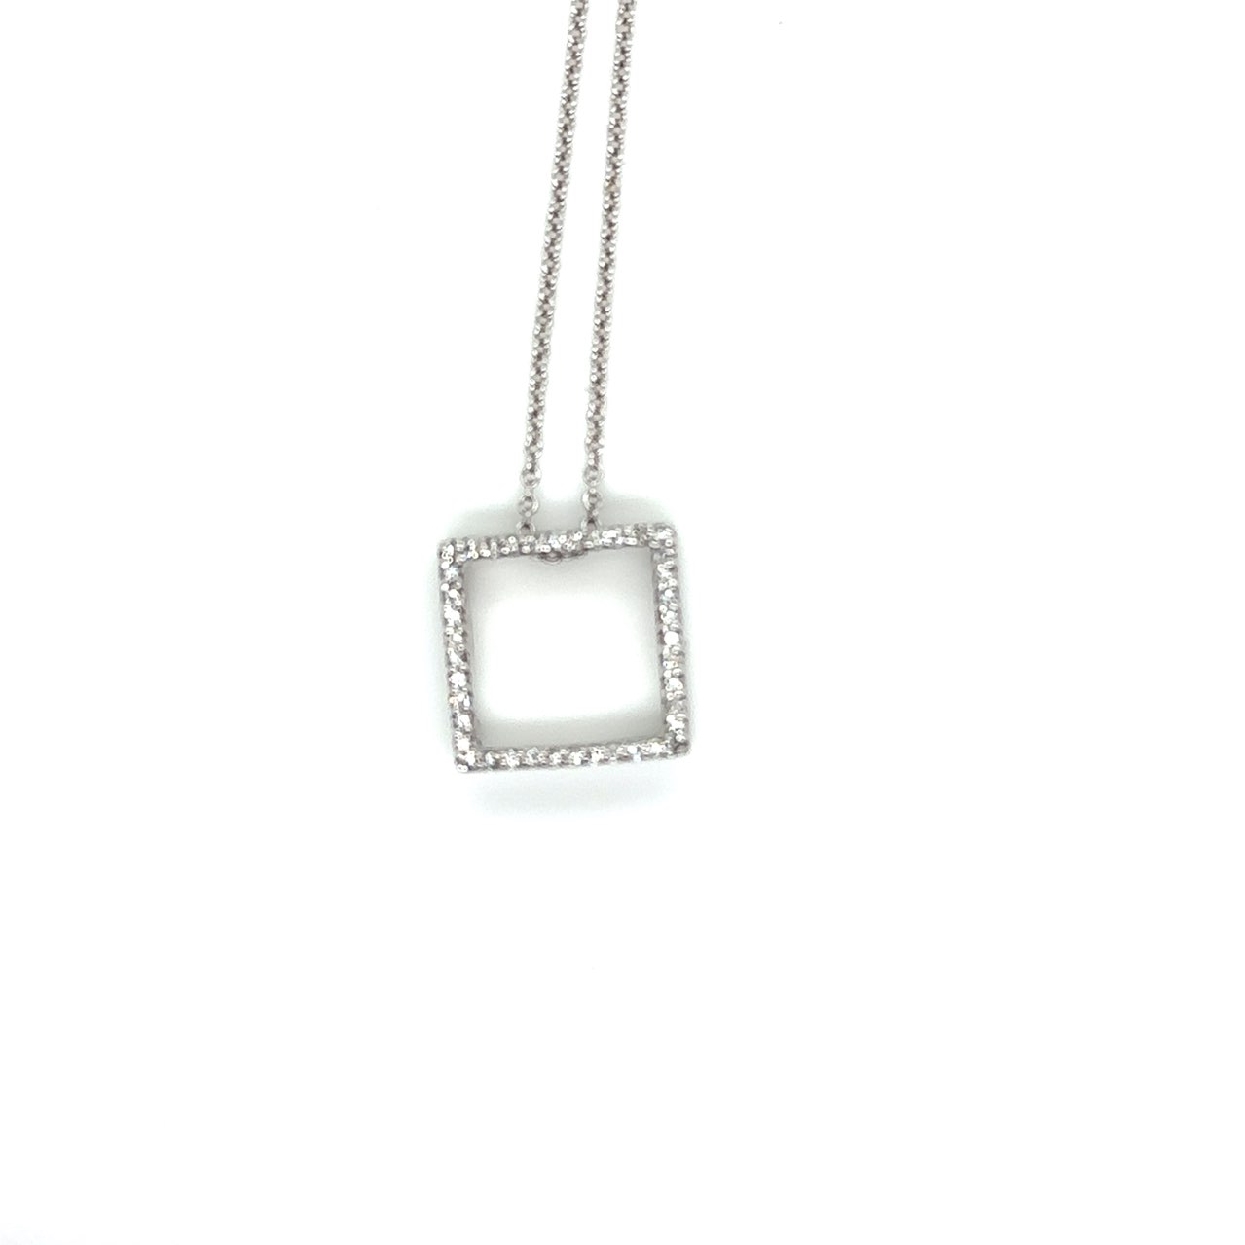 14K White Gold and Diamond Effy Square Shaped Necklace 0.4CT